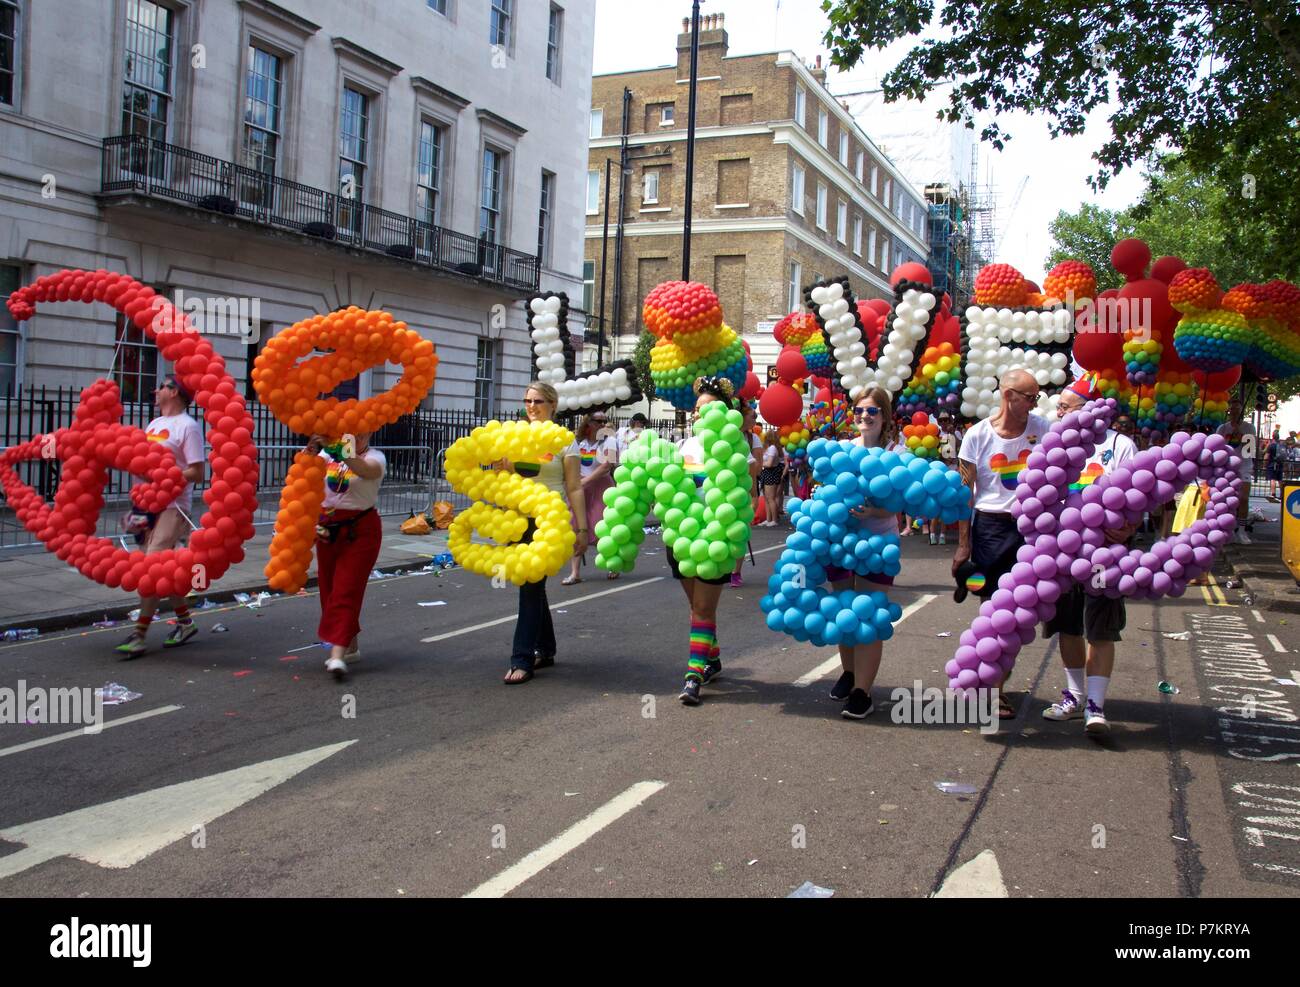 London, UK. 7th July 2018. Pride celebrations in London London, UK. 7th July 2018. Disney at the Pride in London parade 2018. with their name spelt out in rainbow coloured balloons, LOVE spelt out in balloons and Mickey Mouse rainbow balloons. They join more than 1 million attending the march today to celebrate LGBT+. Credit: Dimple Patel/Alamy Live News Stock Photo